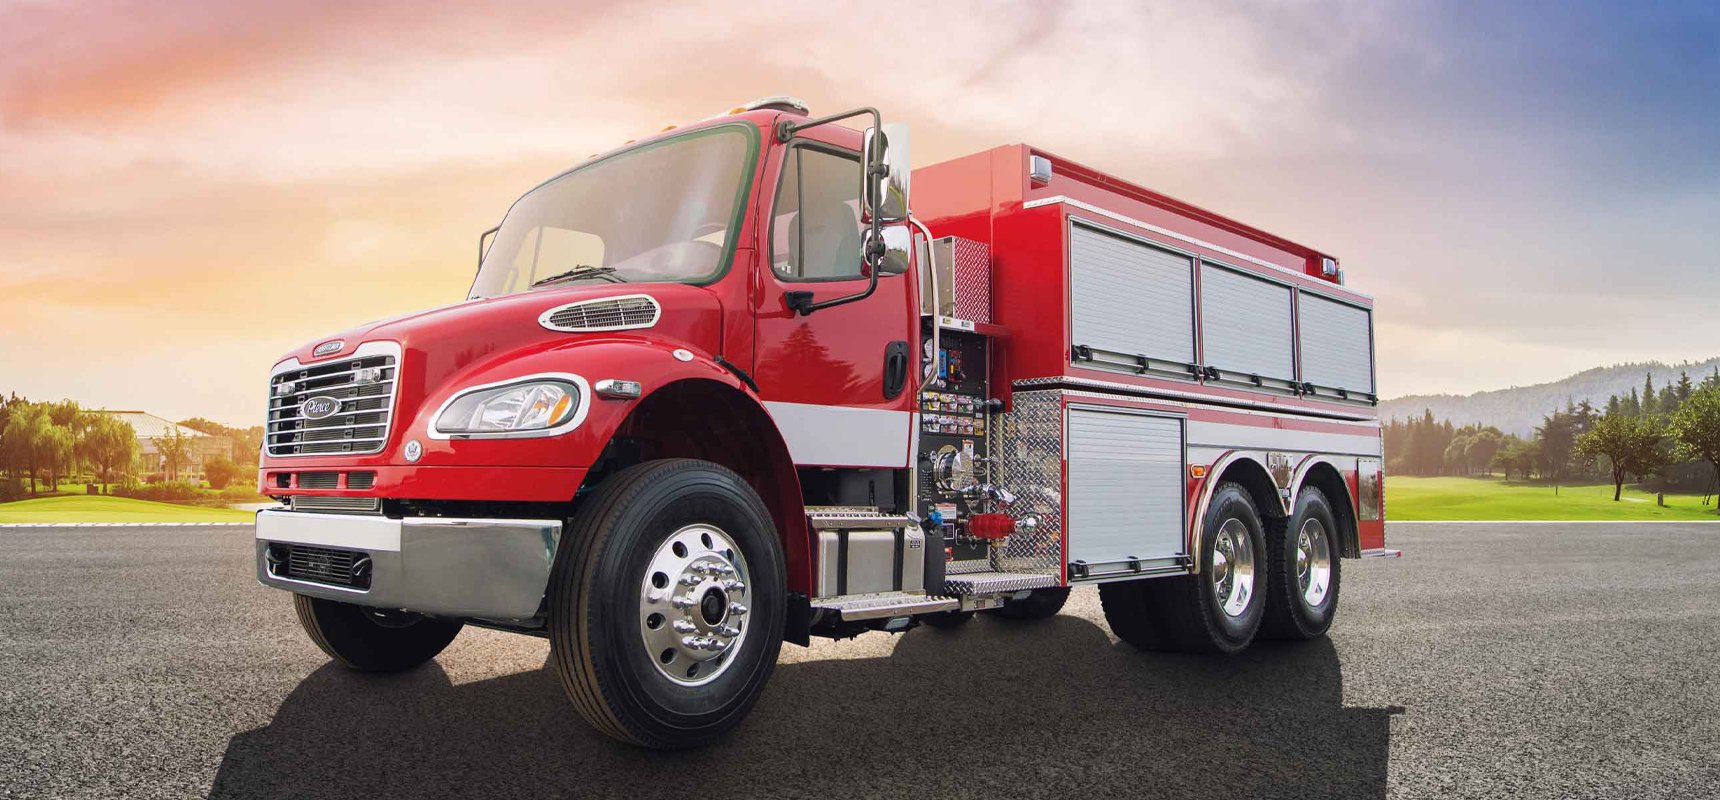 Tanker Fire Trucks: 4 Key Factors in the Specifying Process and the ...